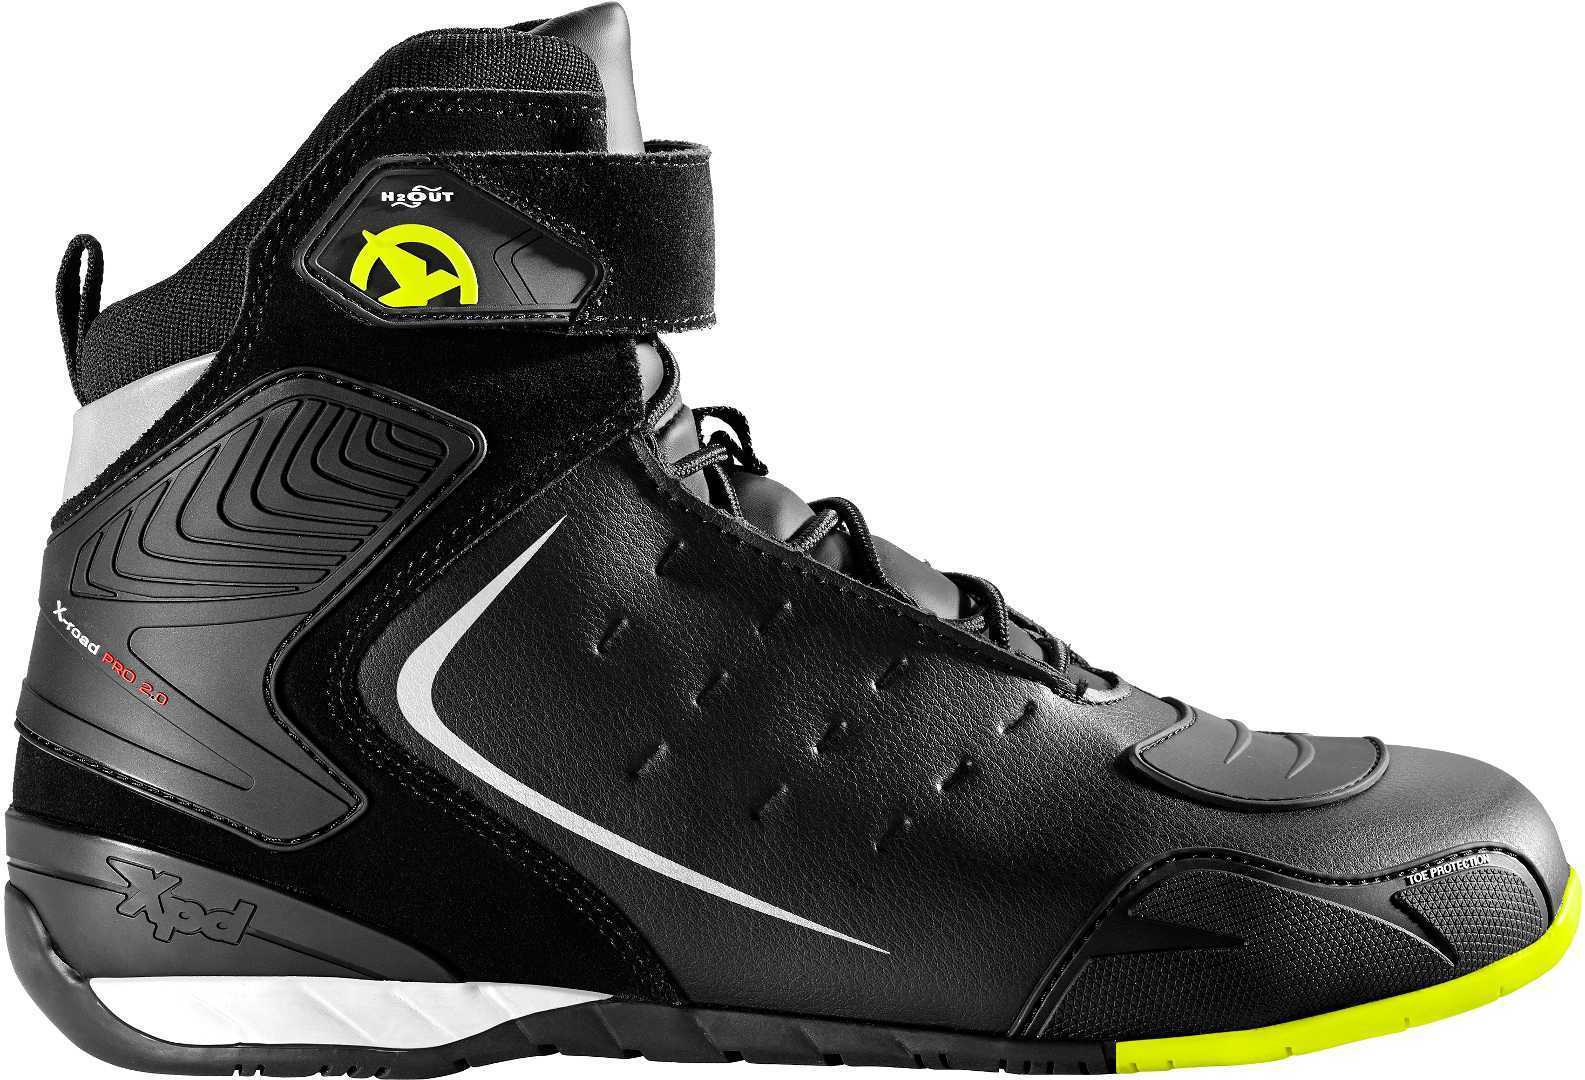 Image of XPD X-Road H2Out Yellow Fluo Size 48 ID 8030161345209